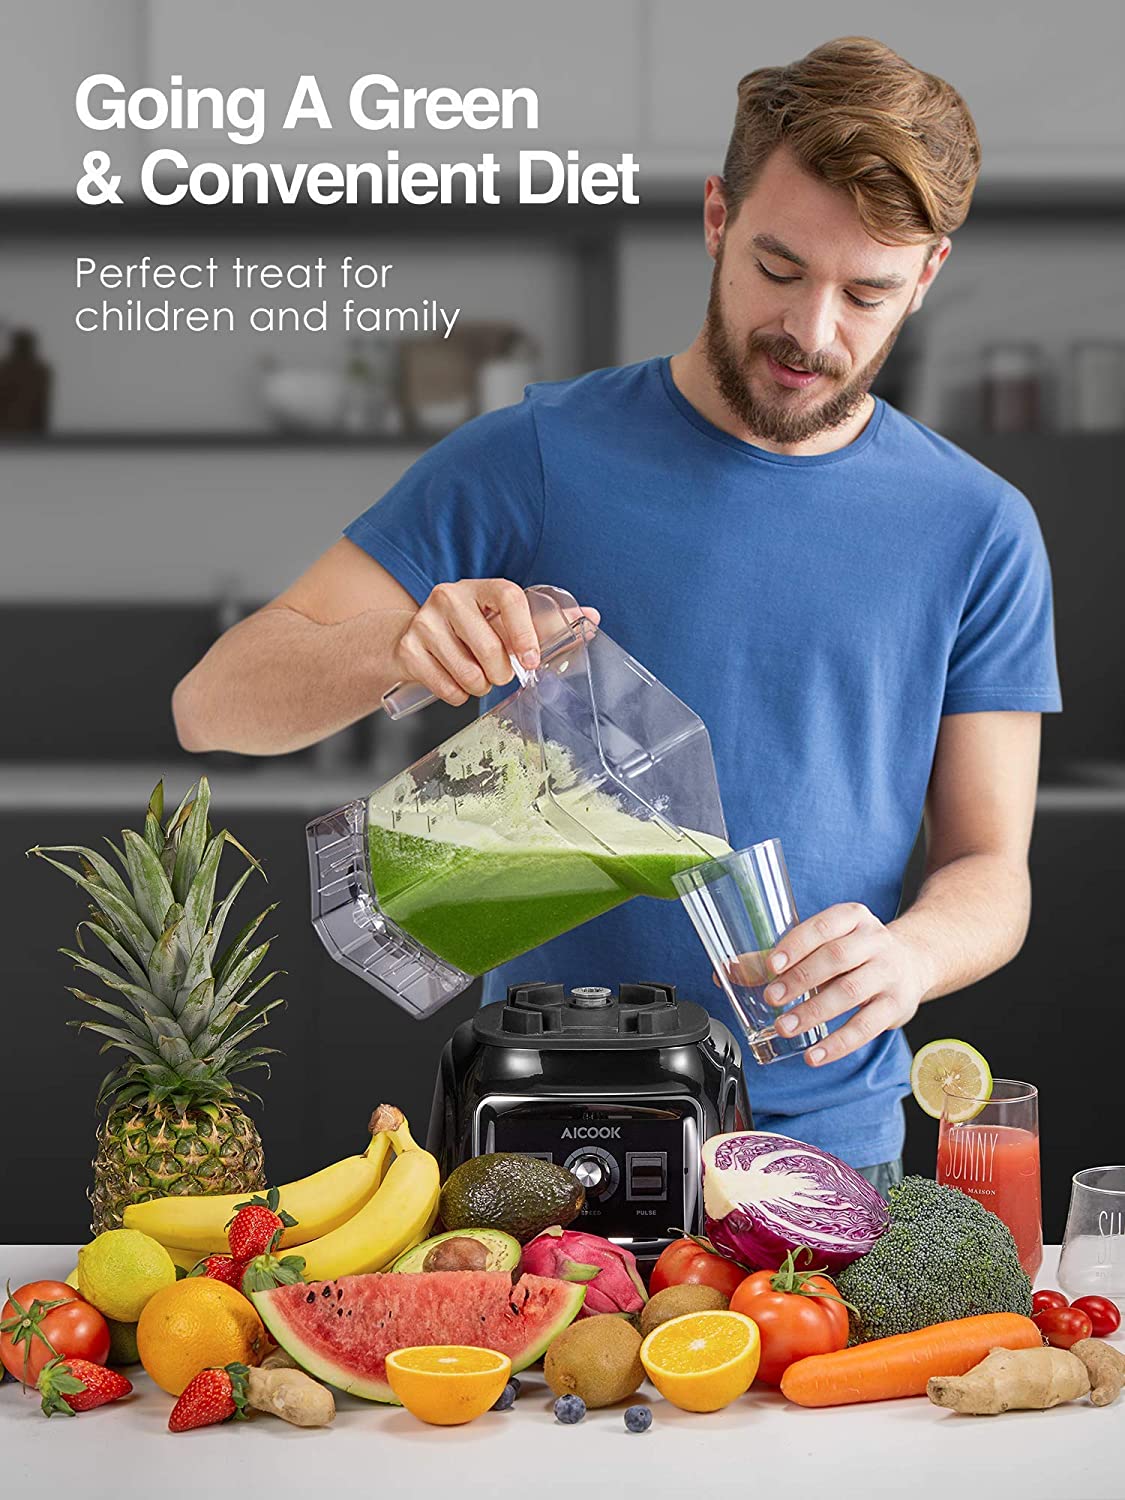 AICOOK | Professional Countertop Blender, 1800W Smoothie Maker Blender for Kitchen, 11-Speed Control Food Processor Blender for Shakes, Smoothies and Frozen Fruit, Going A Green and Covenient Diet